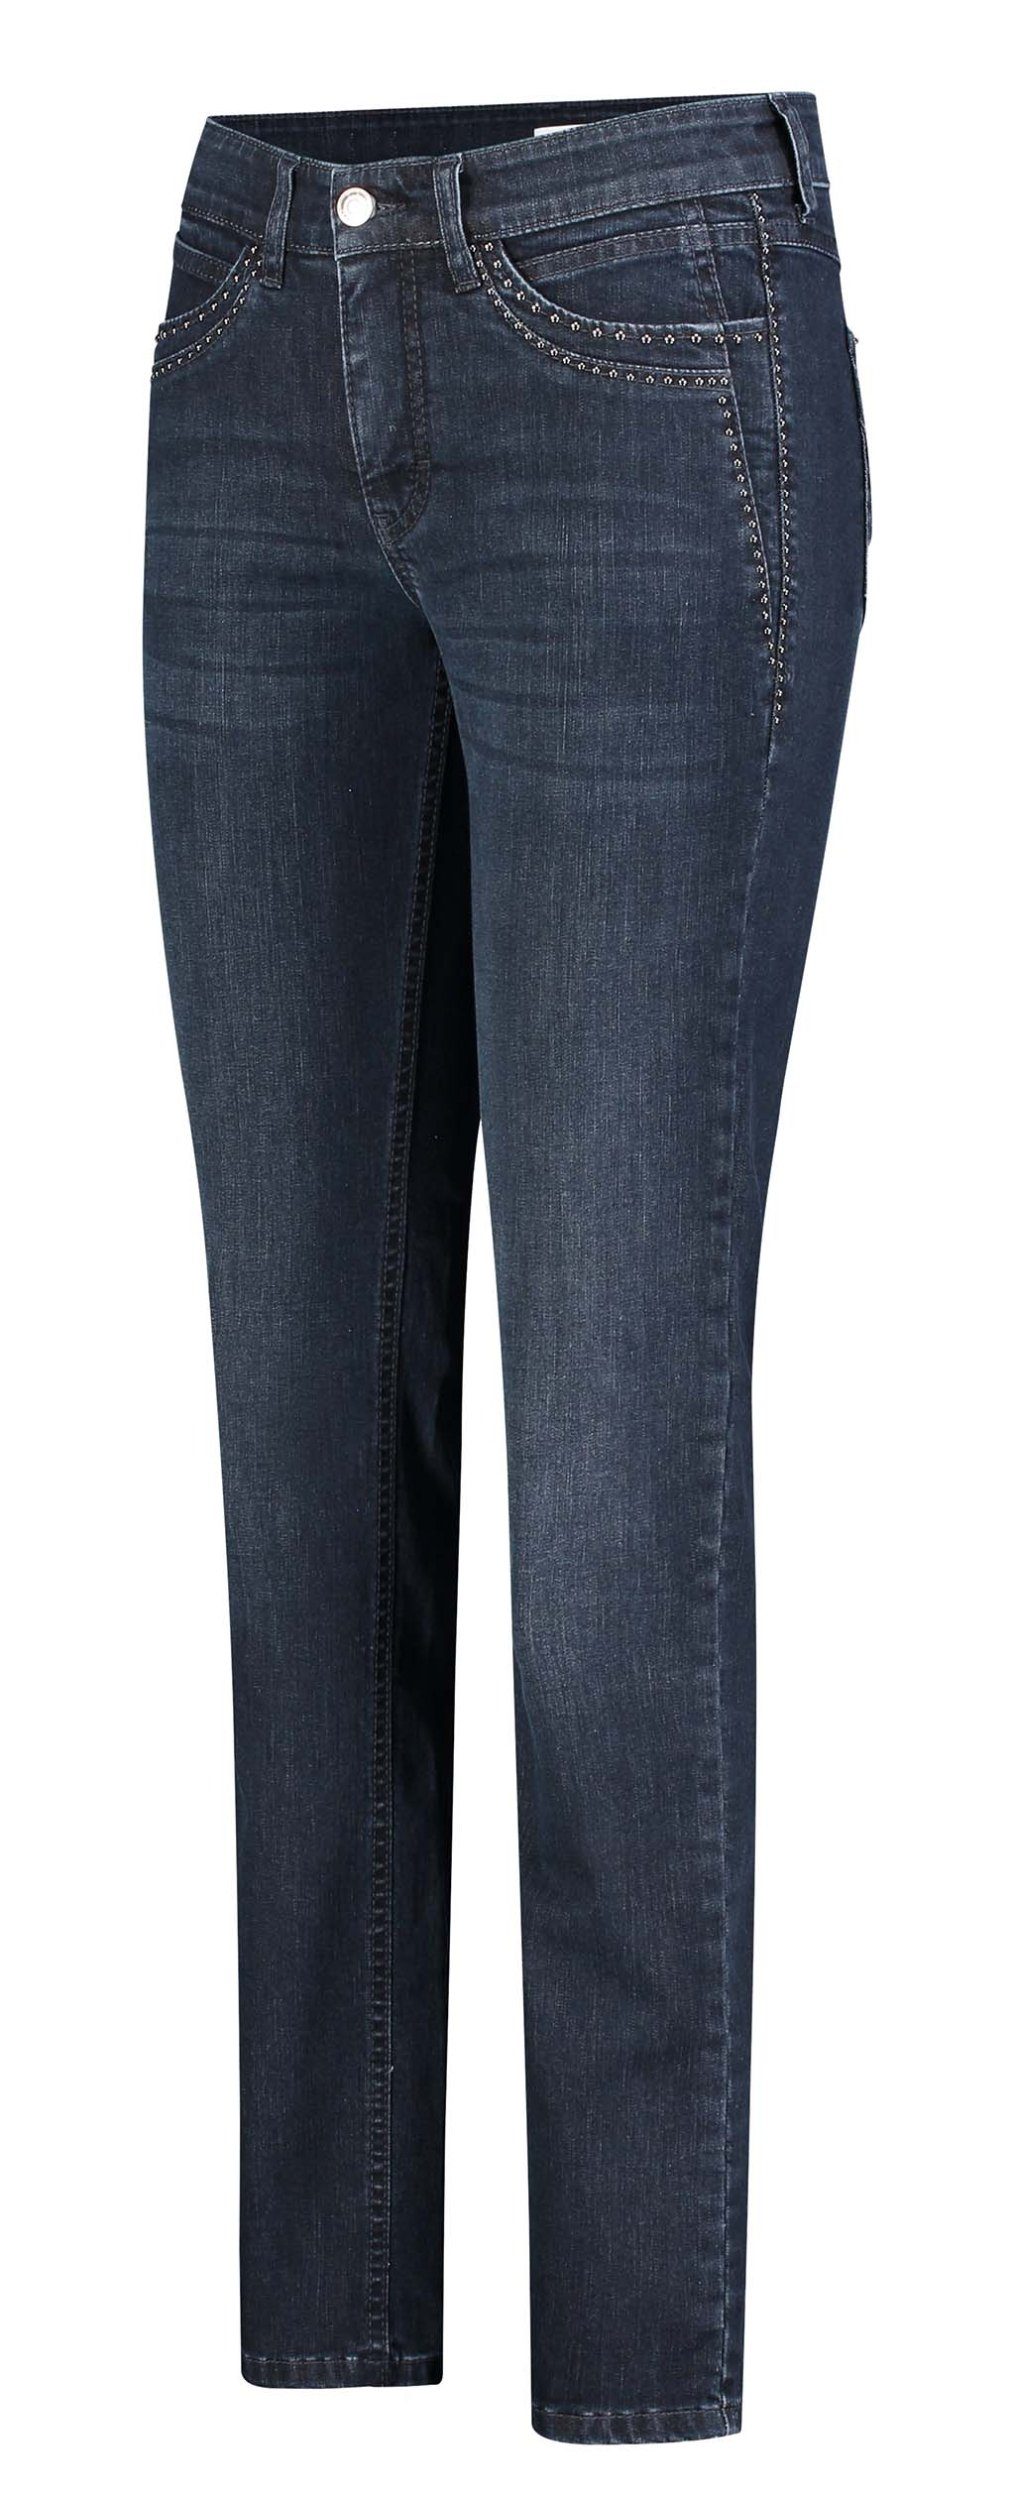 Forever 5-Pocket-Jeans cool, JEANS PERFECT Fit - Denim MAC ANGELA